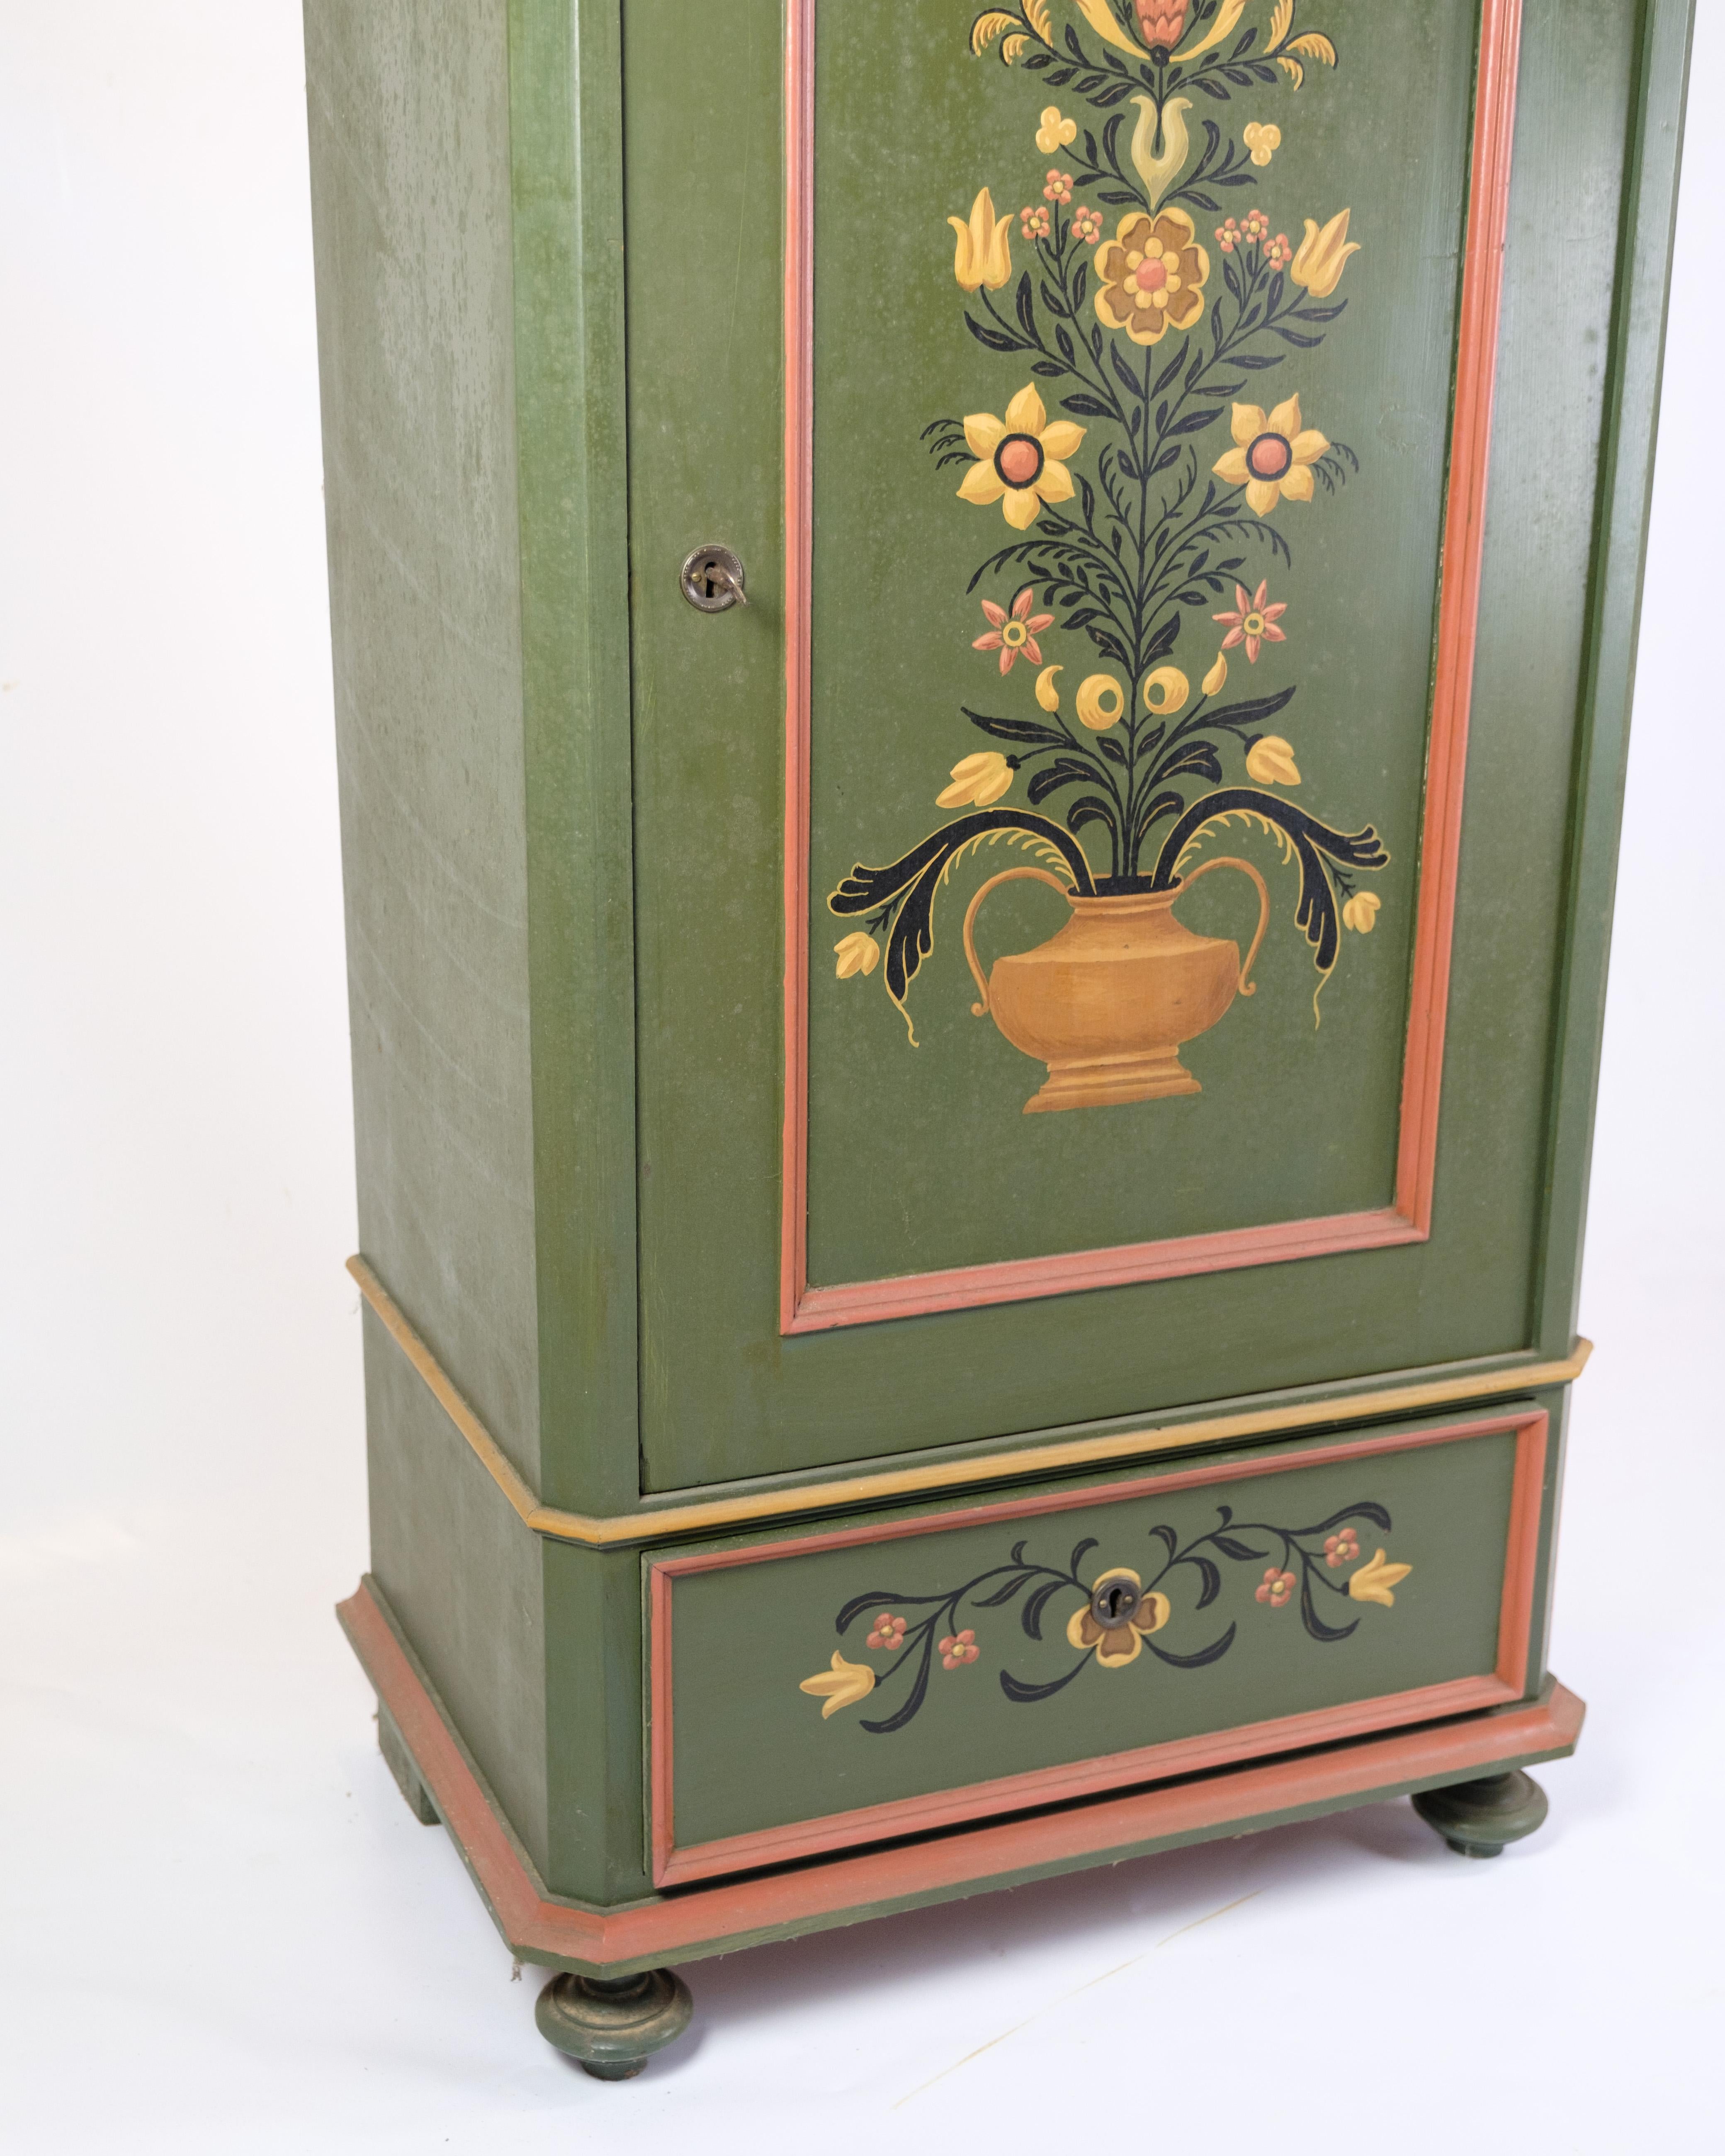 Other Antique Cabinet Hand Painted With Floral Decoration From 1890s For Sale